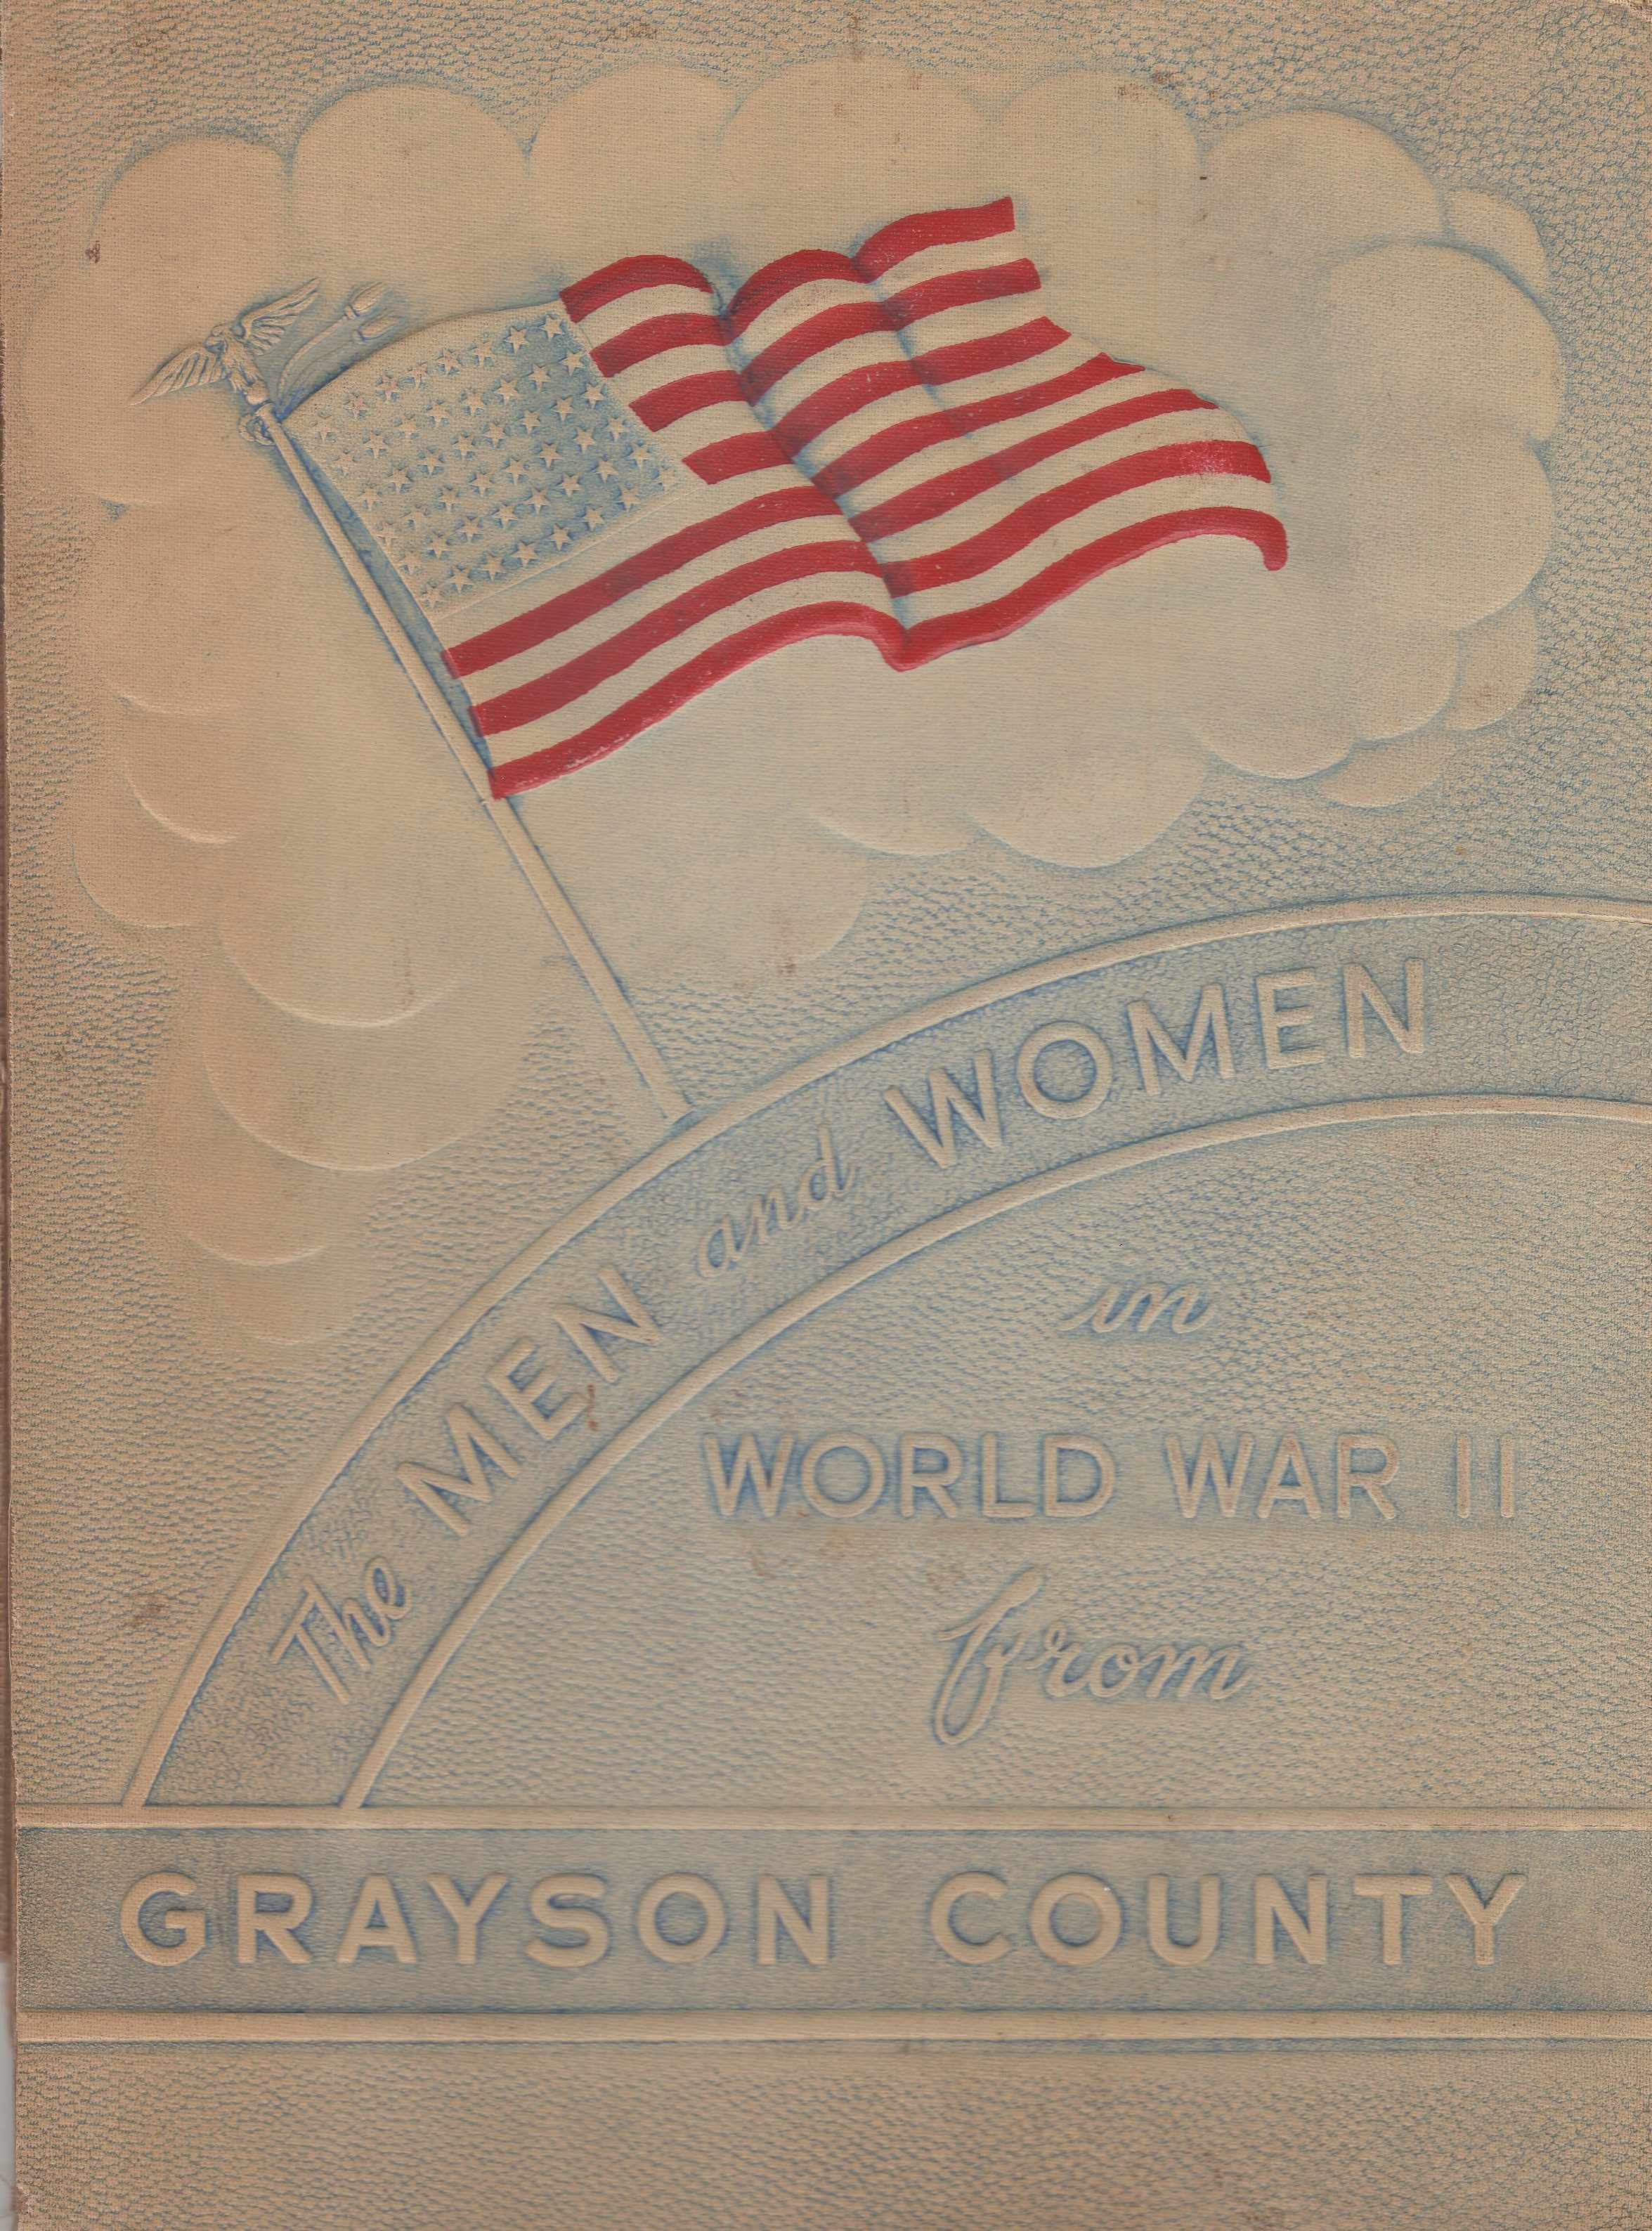 Men and women in the Armed Forces from Grayson County Texas WW2 WWII World War II 2